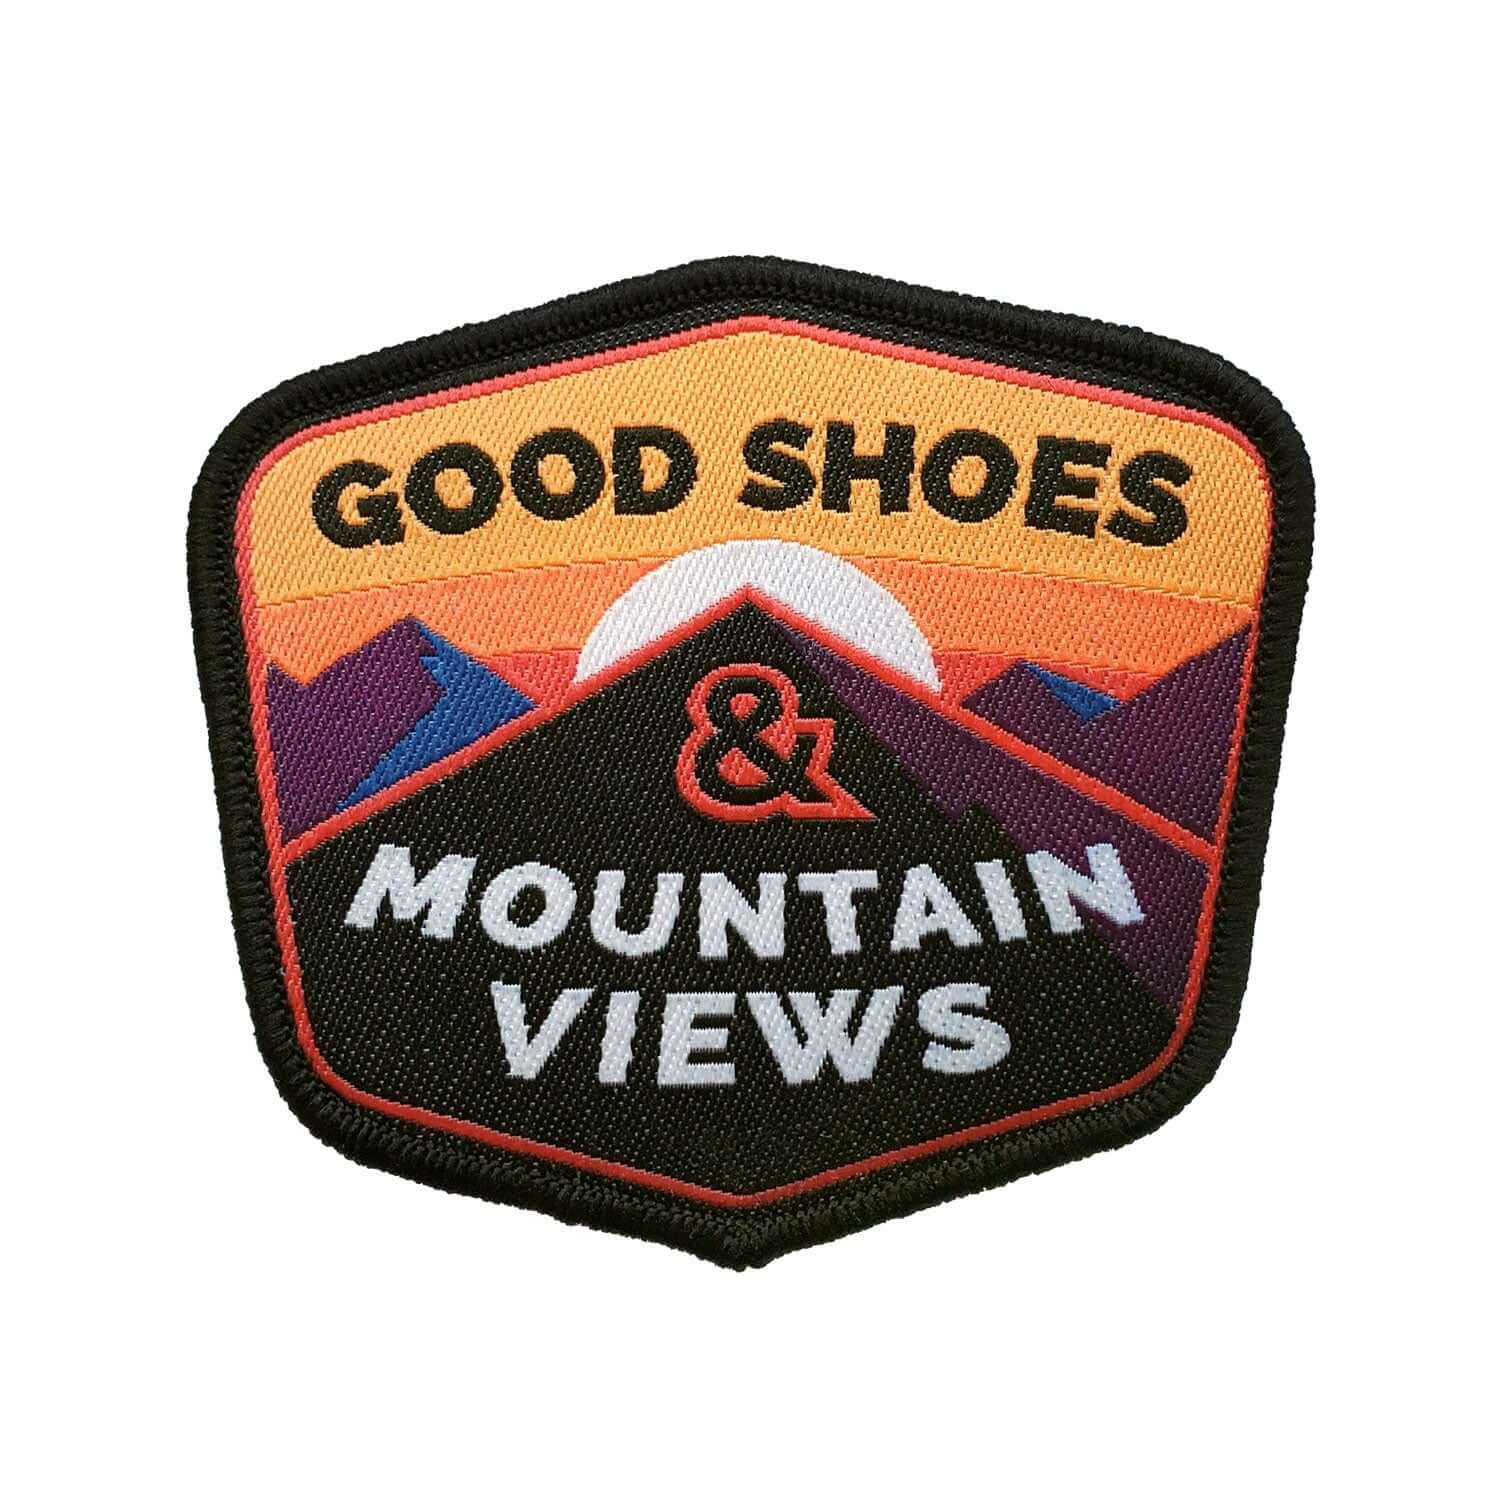 Good Shoes and Mountain Views Iron on Patch - Rocket Factory Apparel